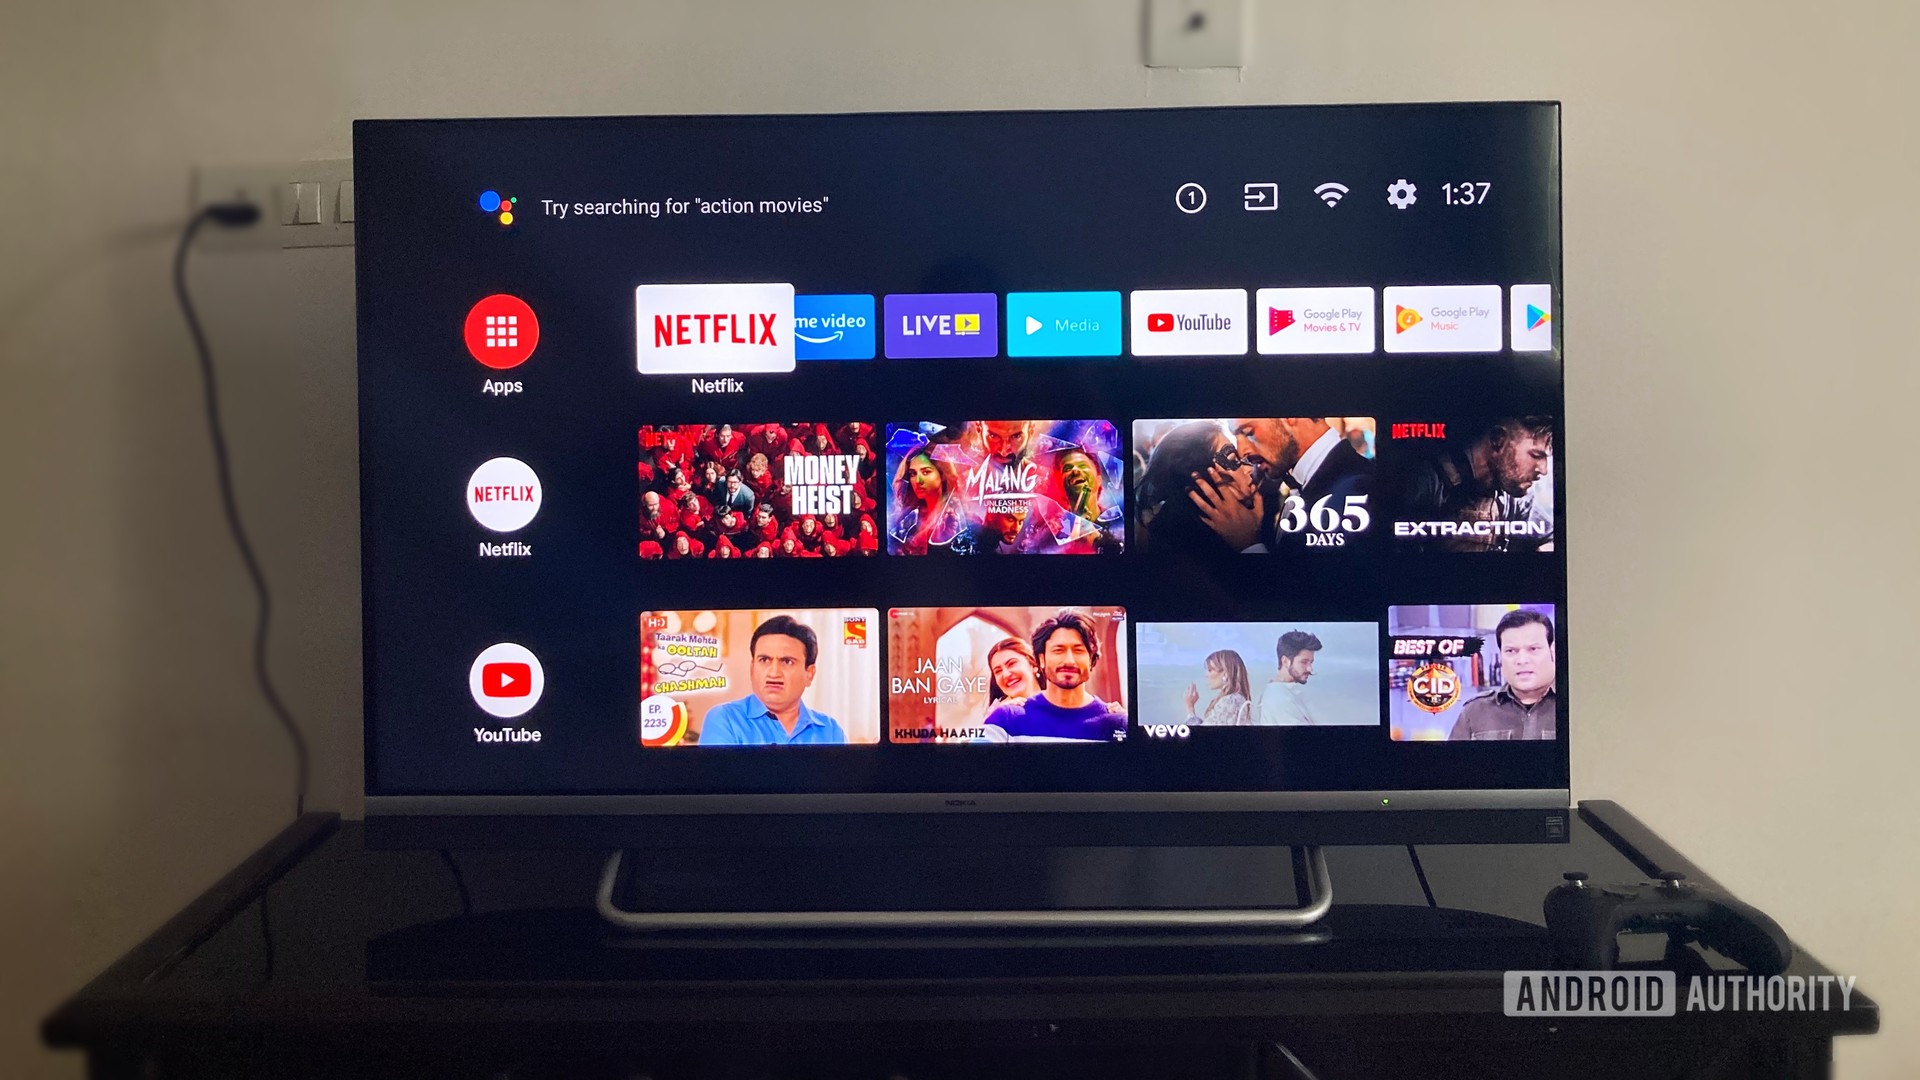 Android TV buyer's guide: All you need to know about Google's TV